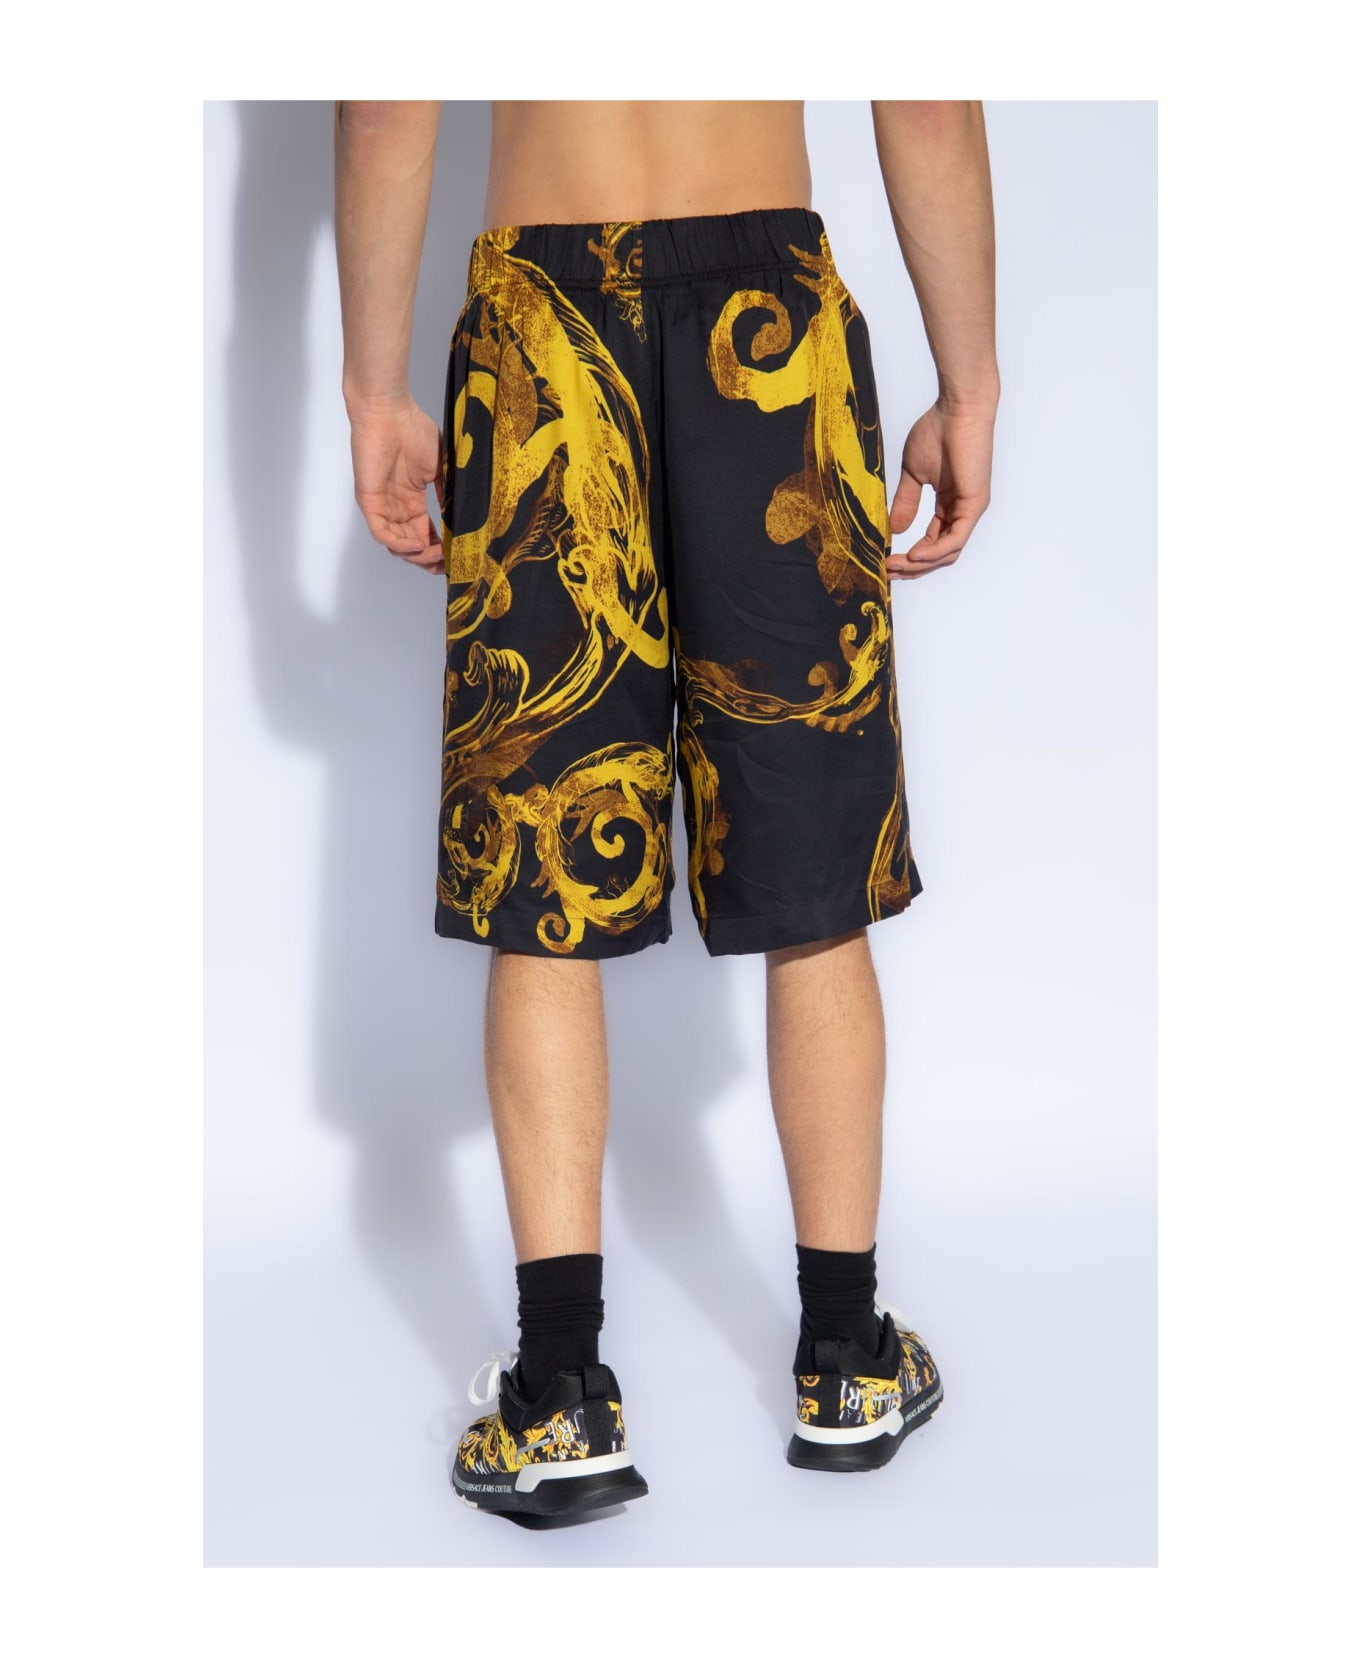 Versace Jeans Couture Printed Shorts - Black